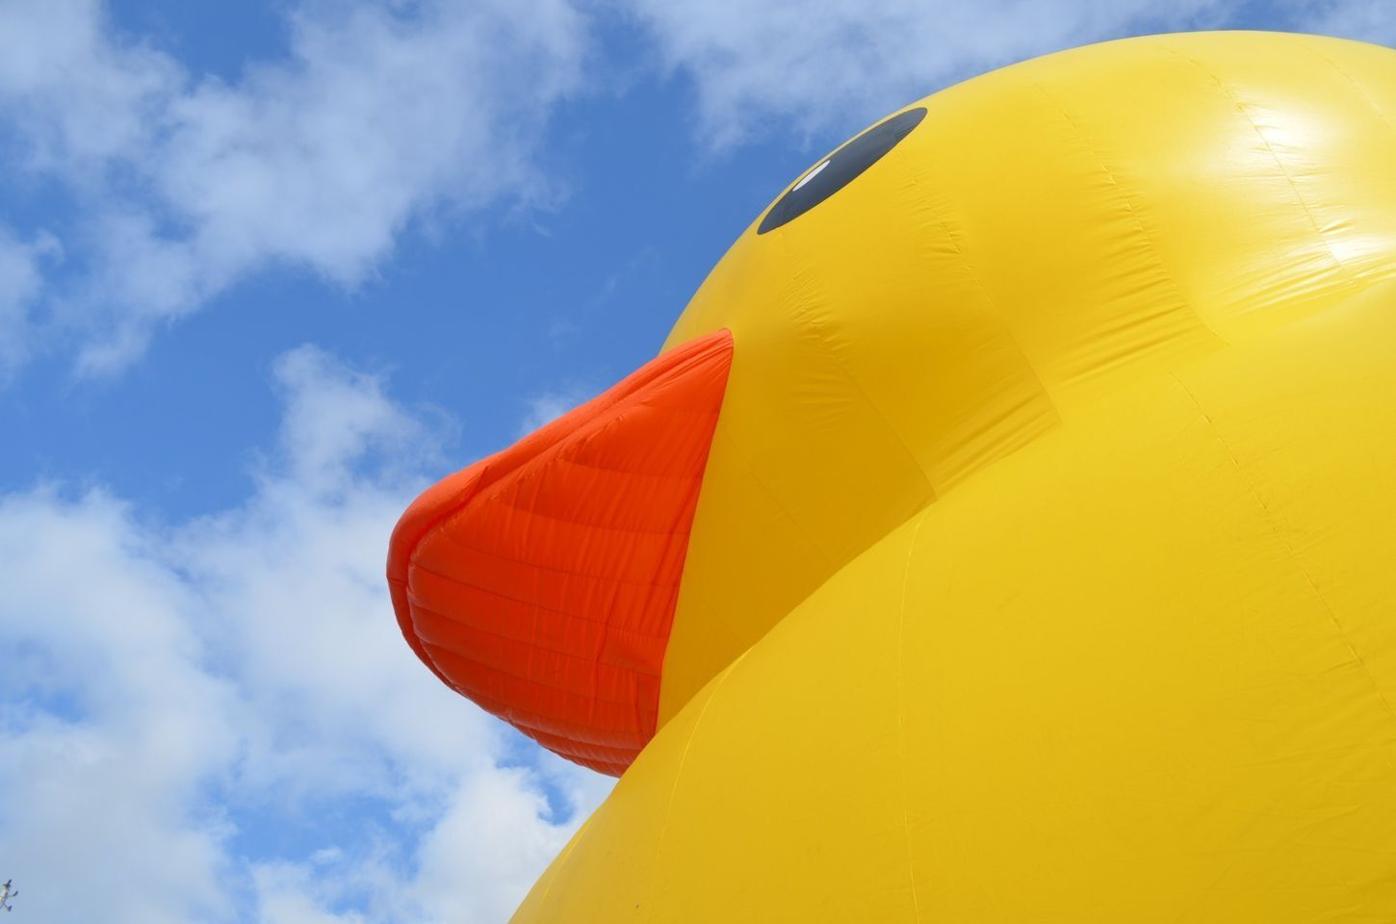 World's Largest Rubber Duck coming to Maryland